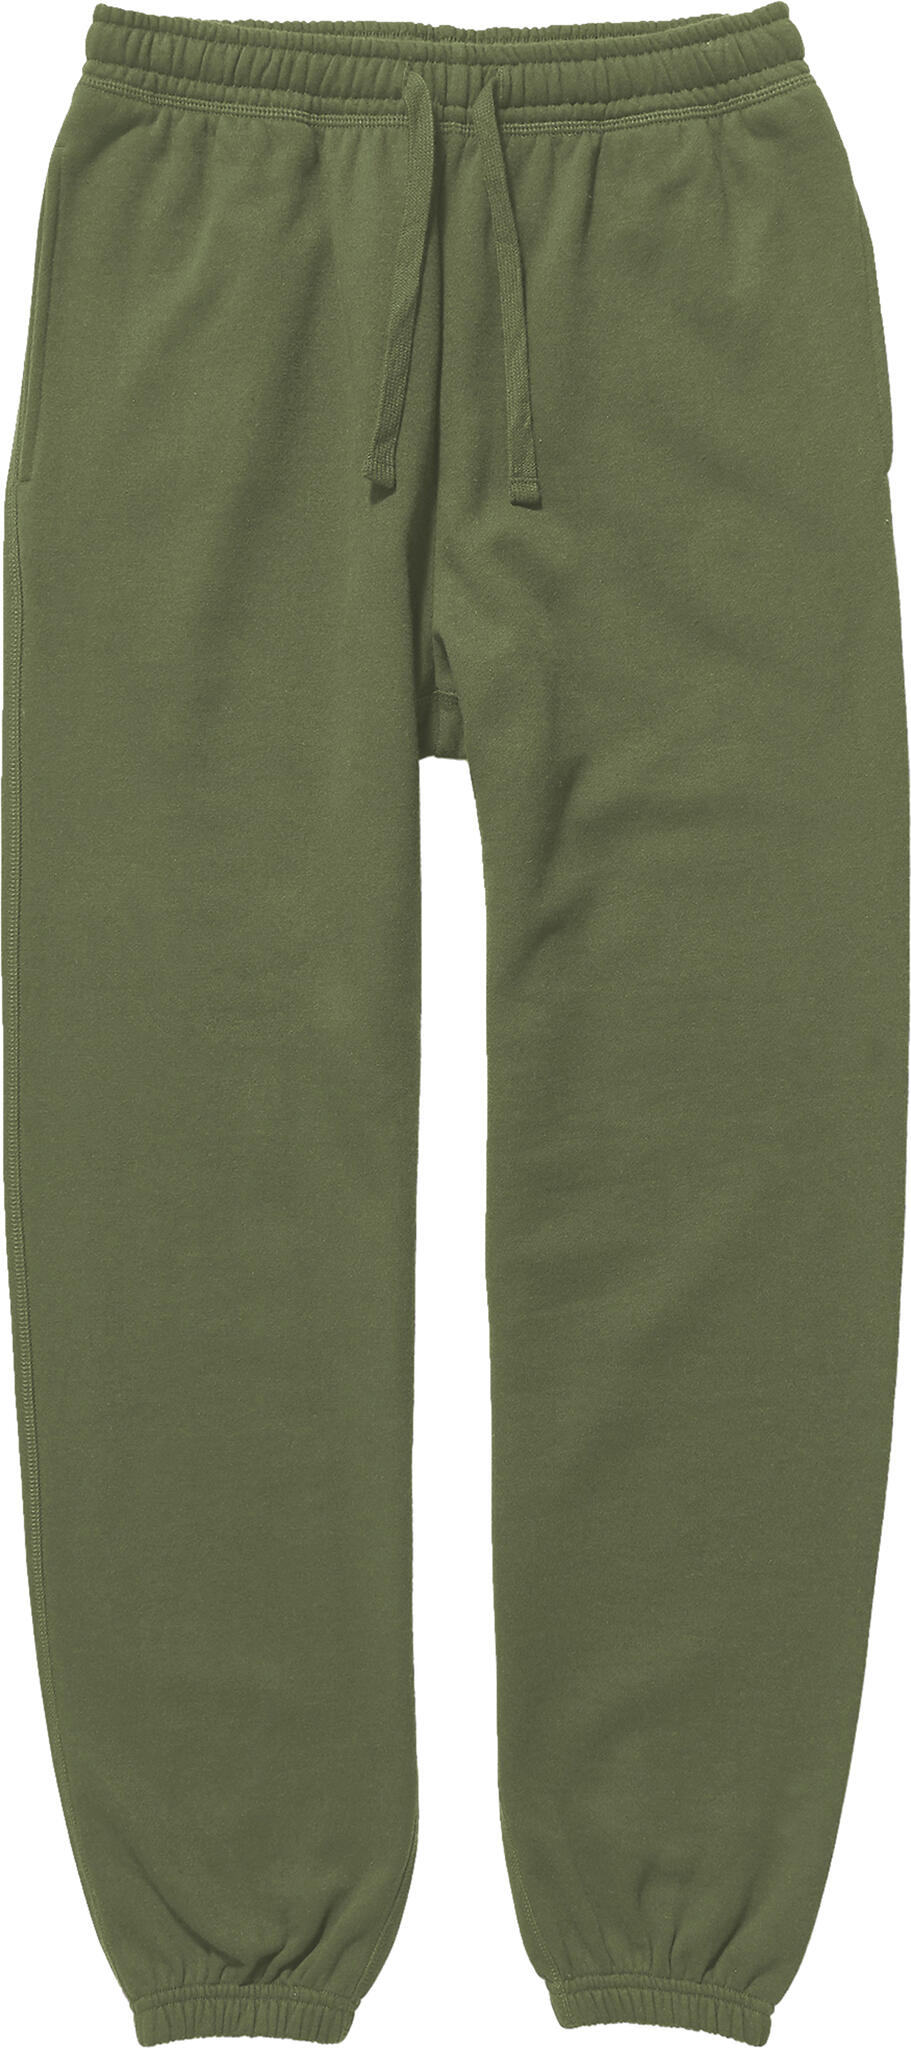 Richer Poorer, Pants & Jumpsuits, Richer Poorer Nwt Recycled Fleece  Classic Sweatpant Clay Small Womens